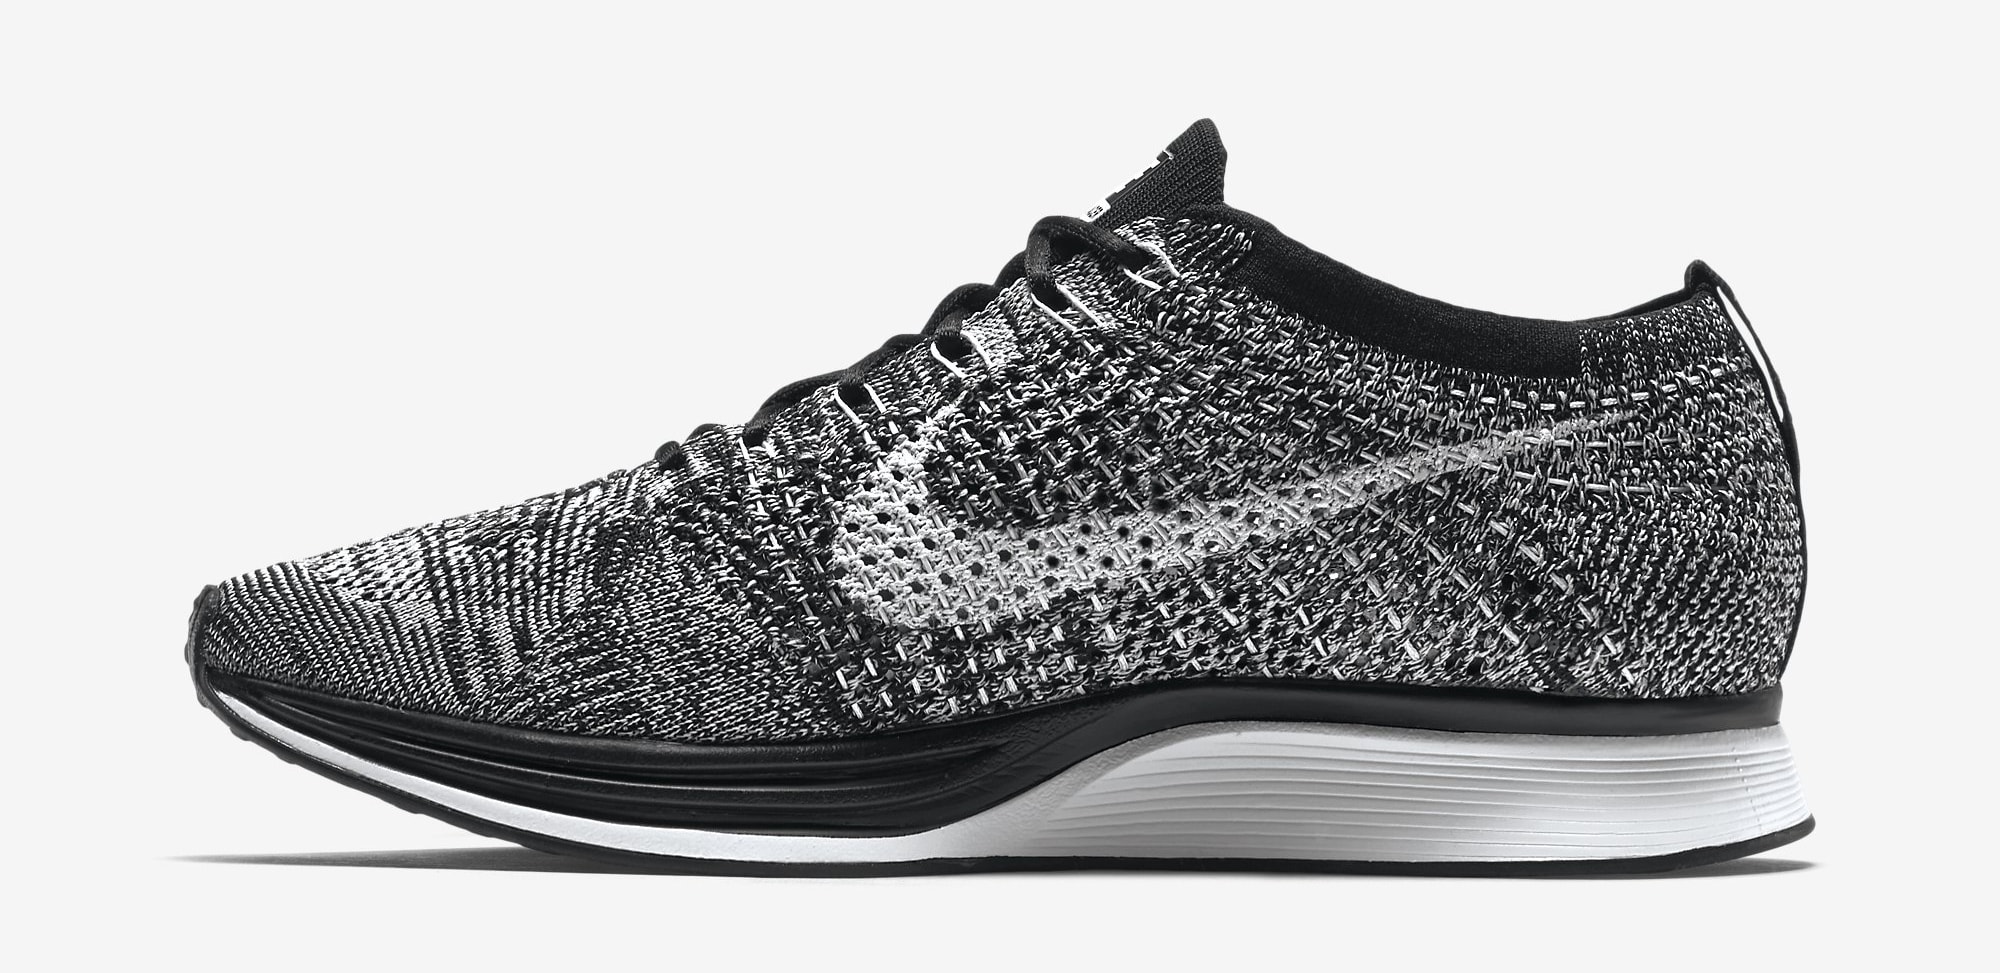 Oreo Nike Flyknit Racer 2017 Restock | Sole Collector